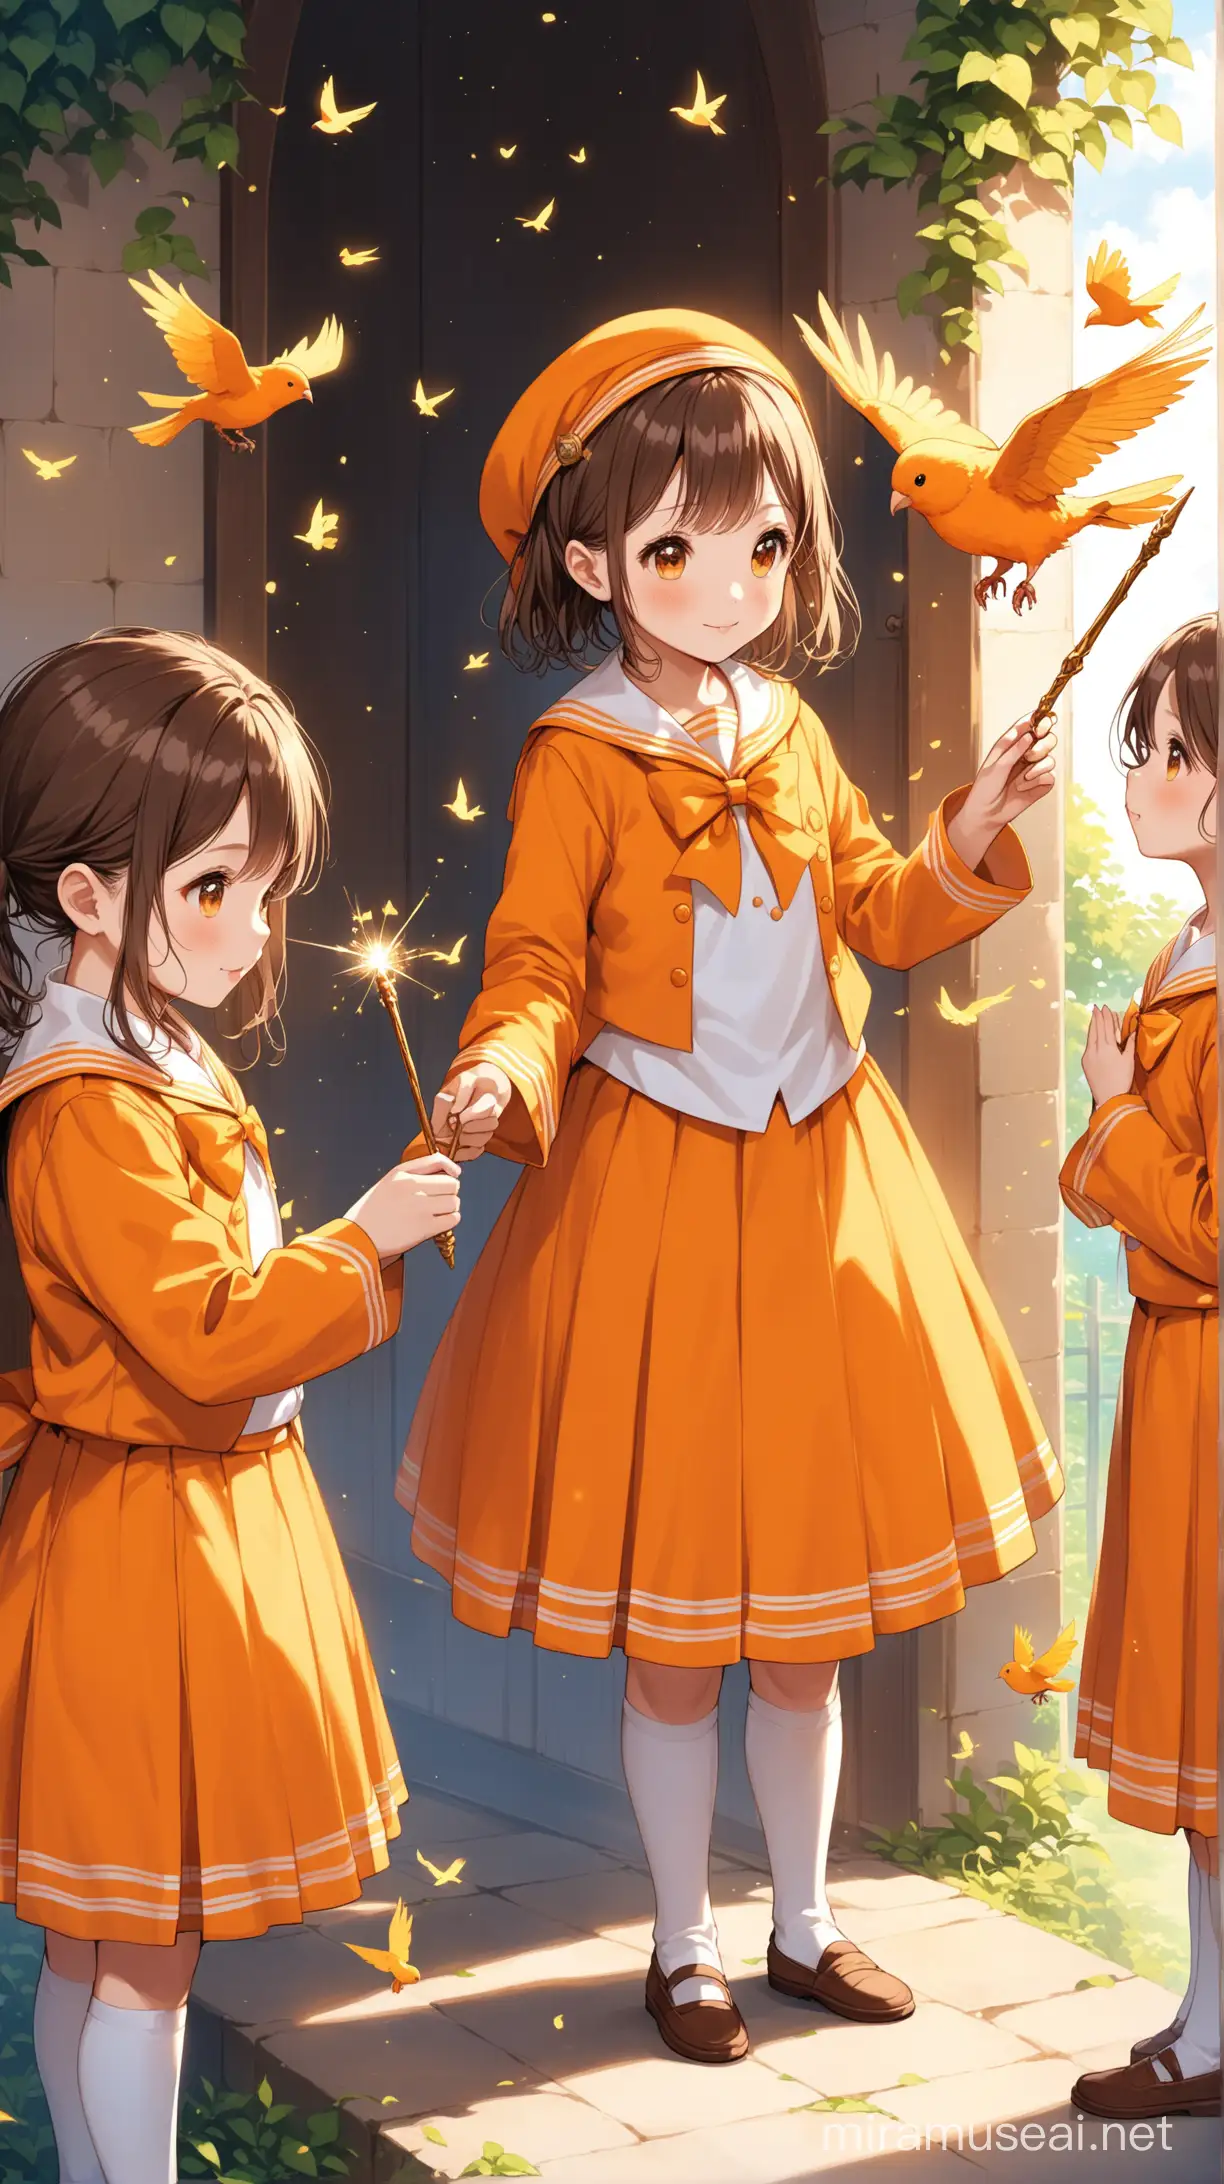 a  school wgere kids are being taught about magic and everyine wears white orange uniform has wands and a pet bird with them
